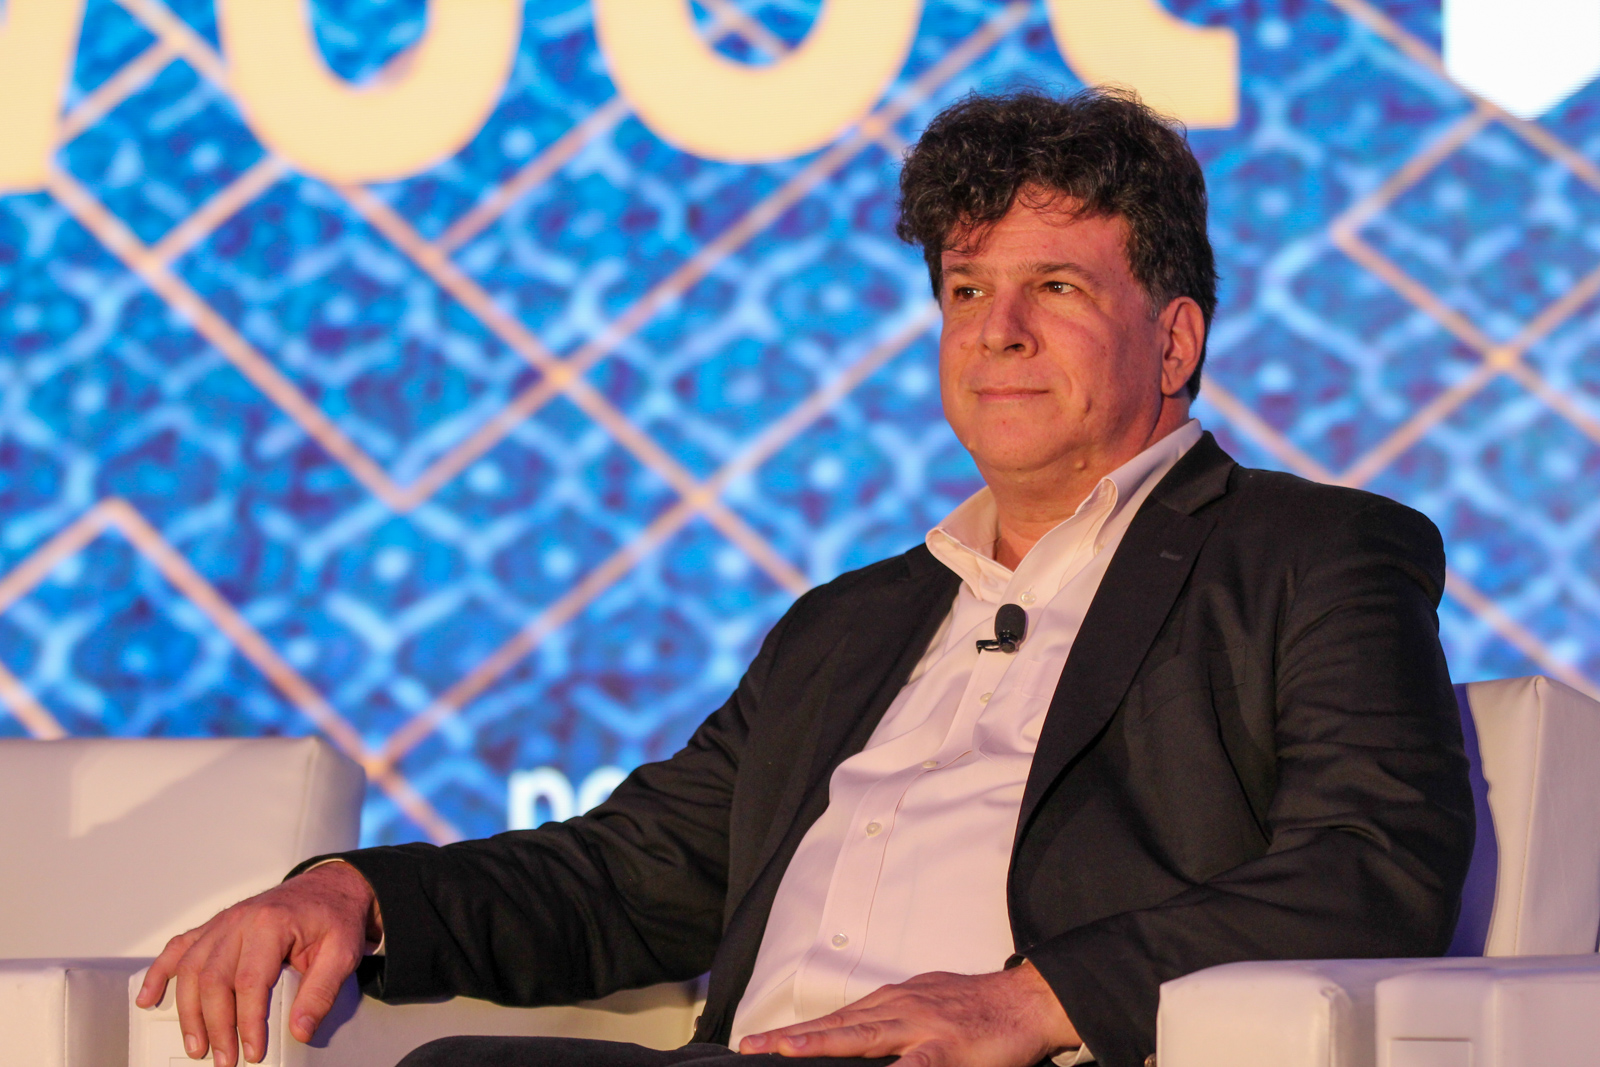 WATCH: Thiel Capital’s Eric Weinstein Talks About The Nature Of Money